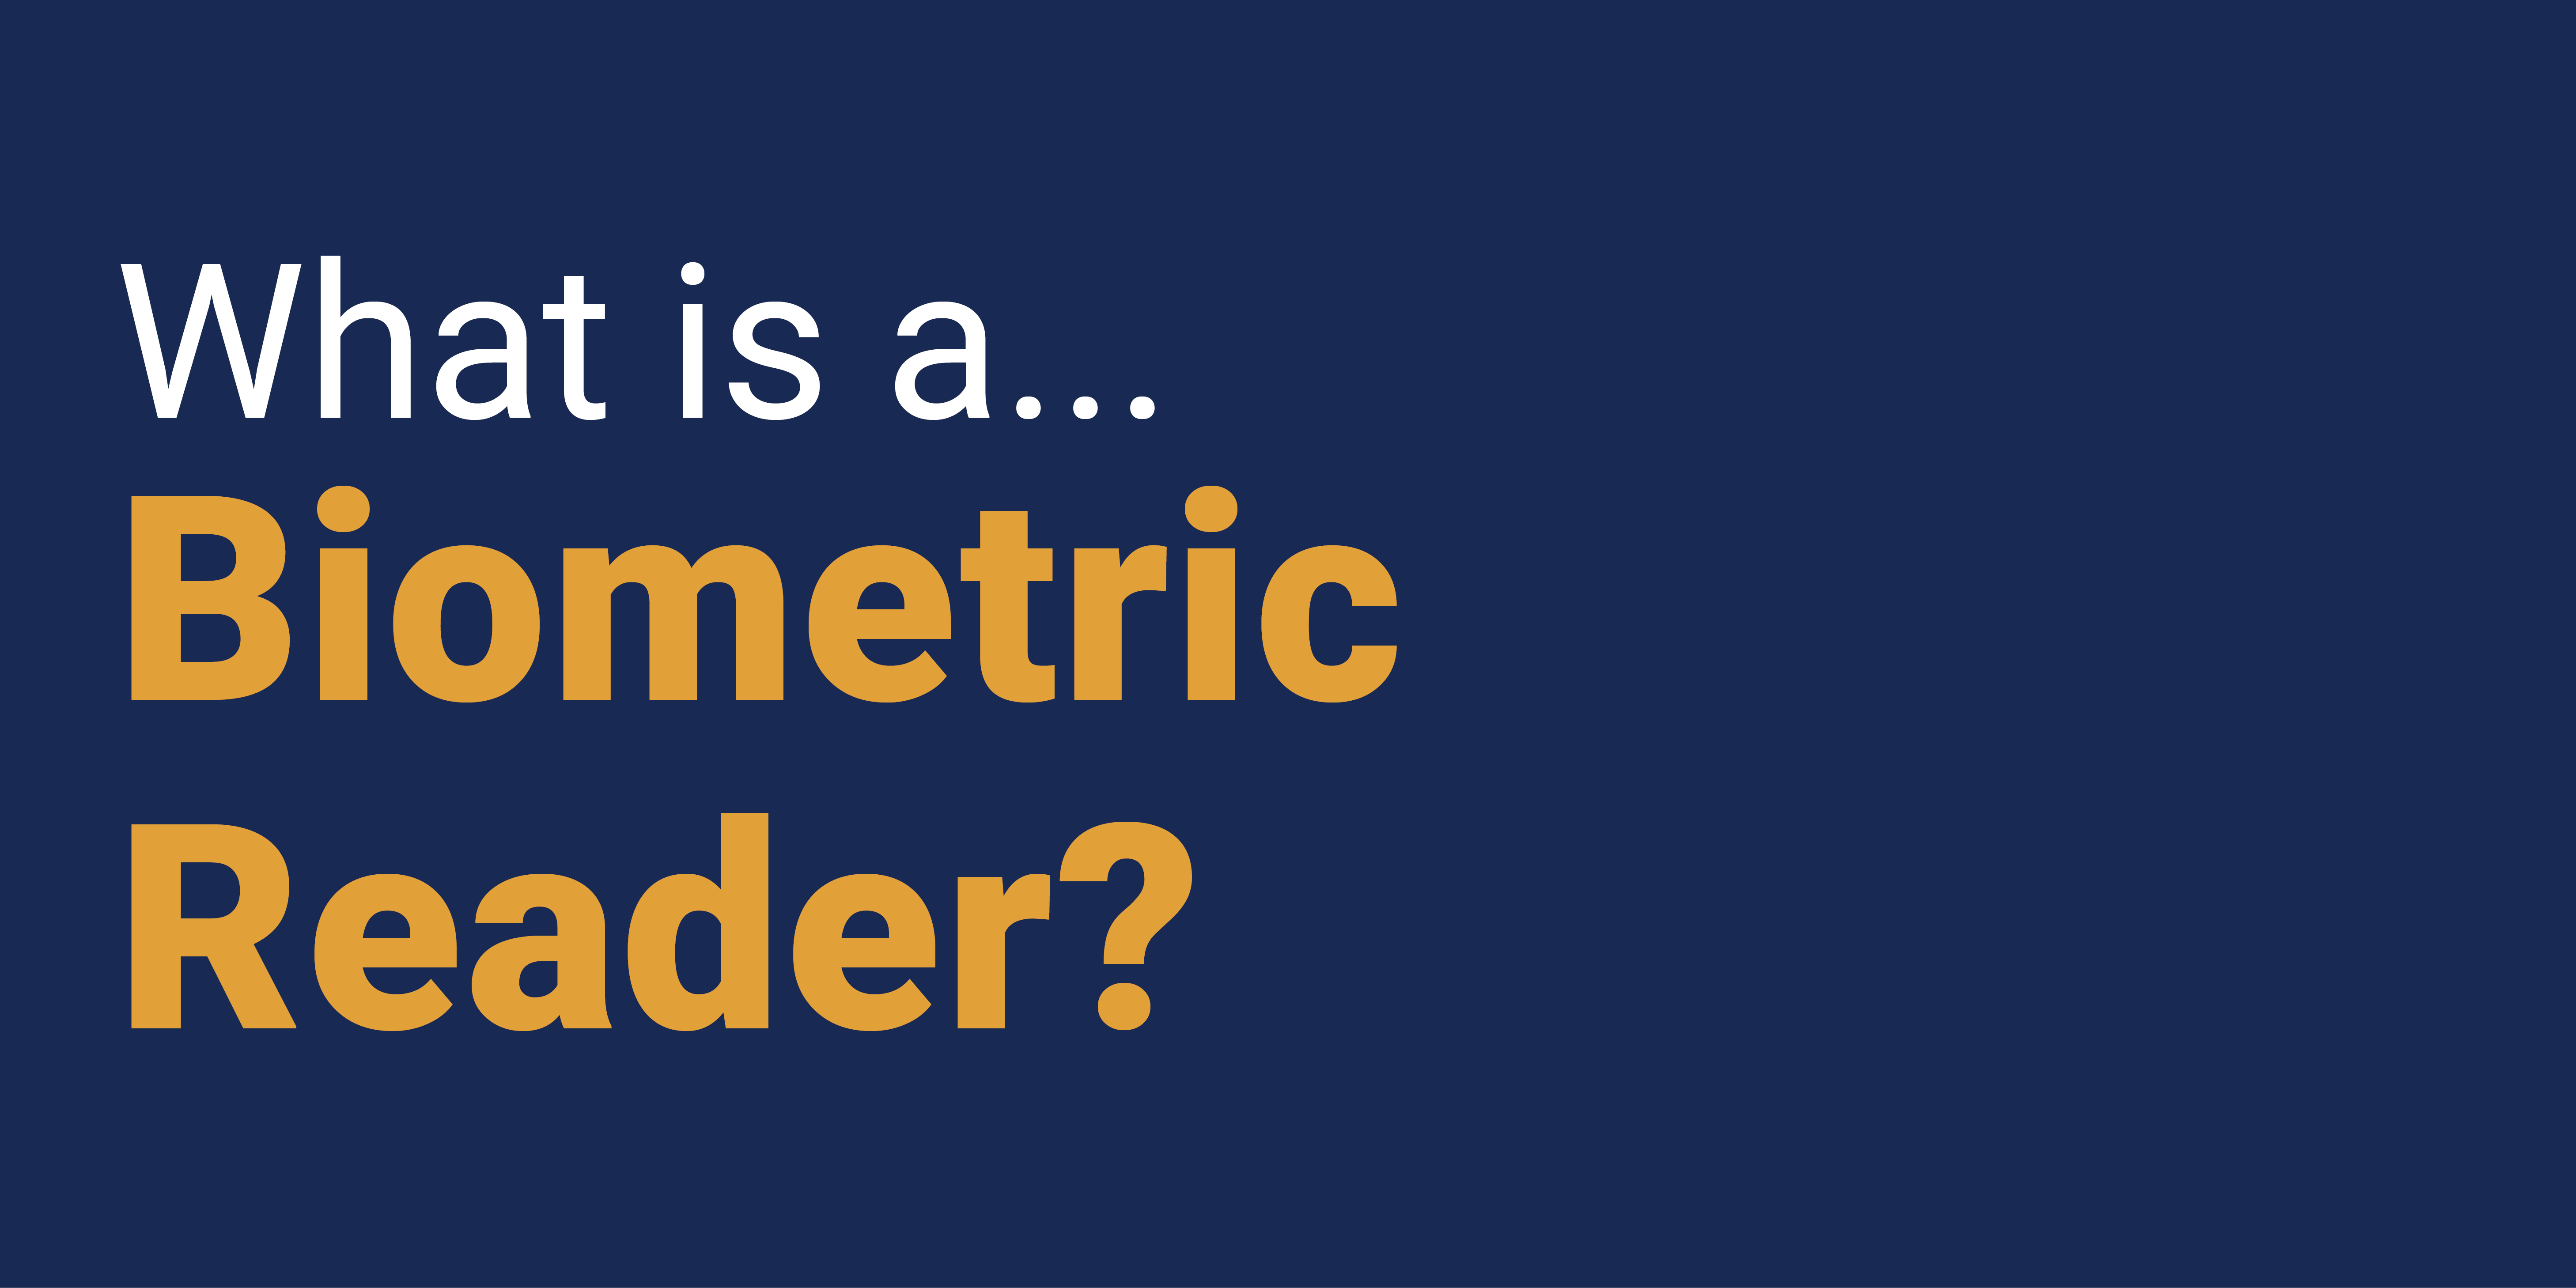 What is a Biometric Reader?